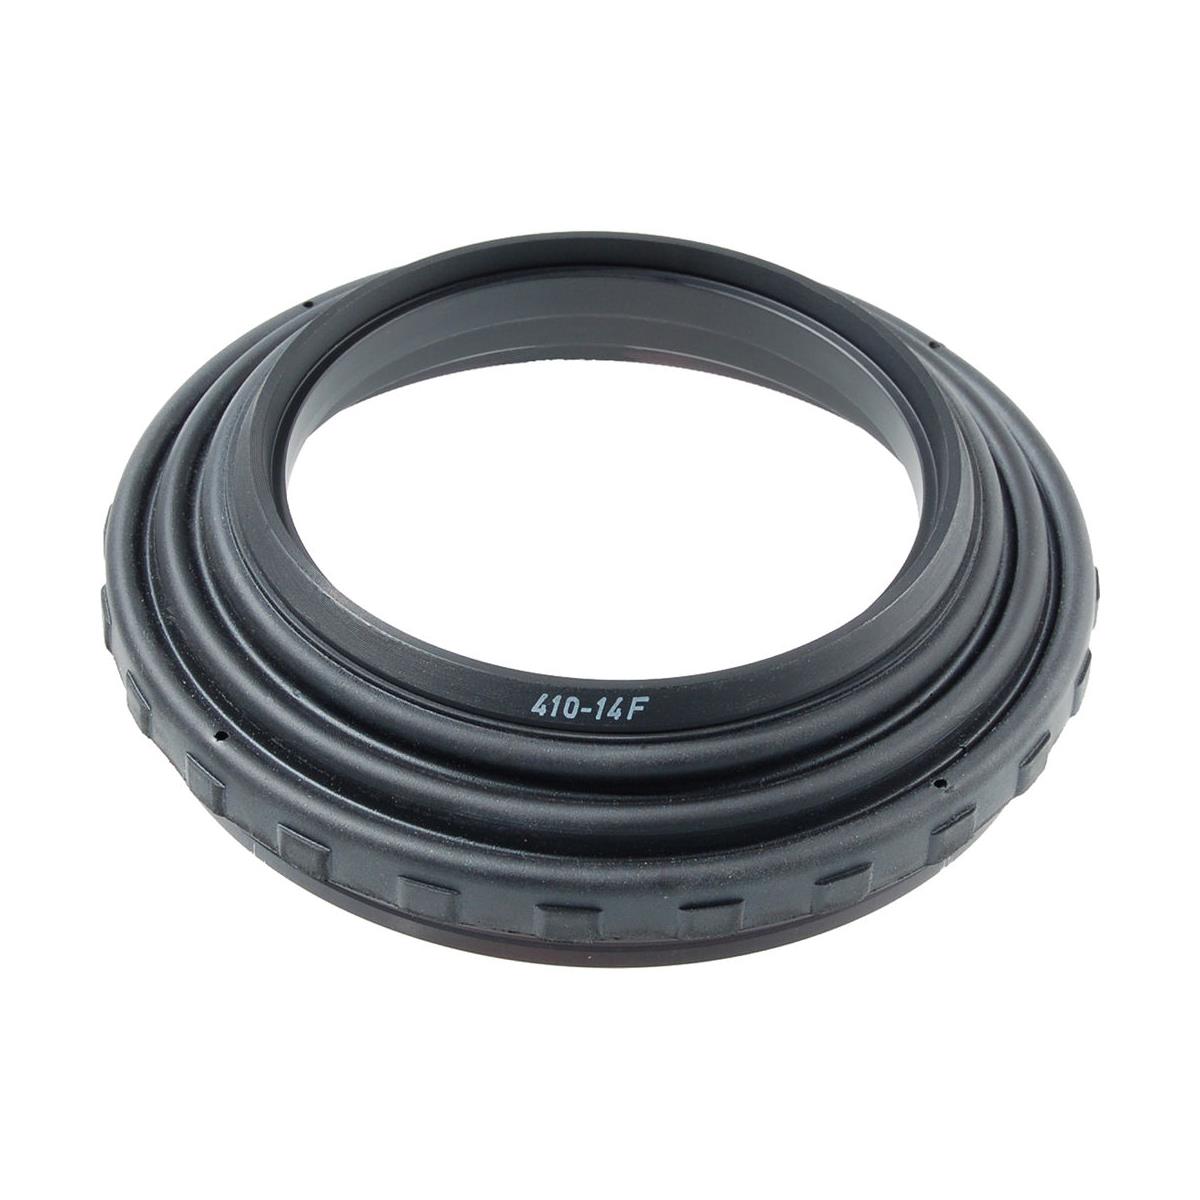 Image of Chrosziel 95mm Insert Ring for Rubber Bellows Retaining Ring